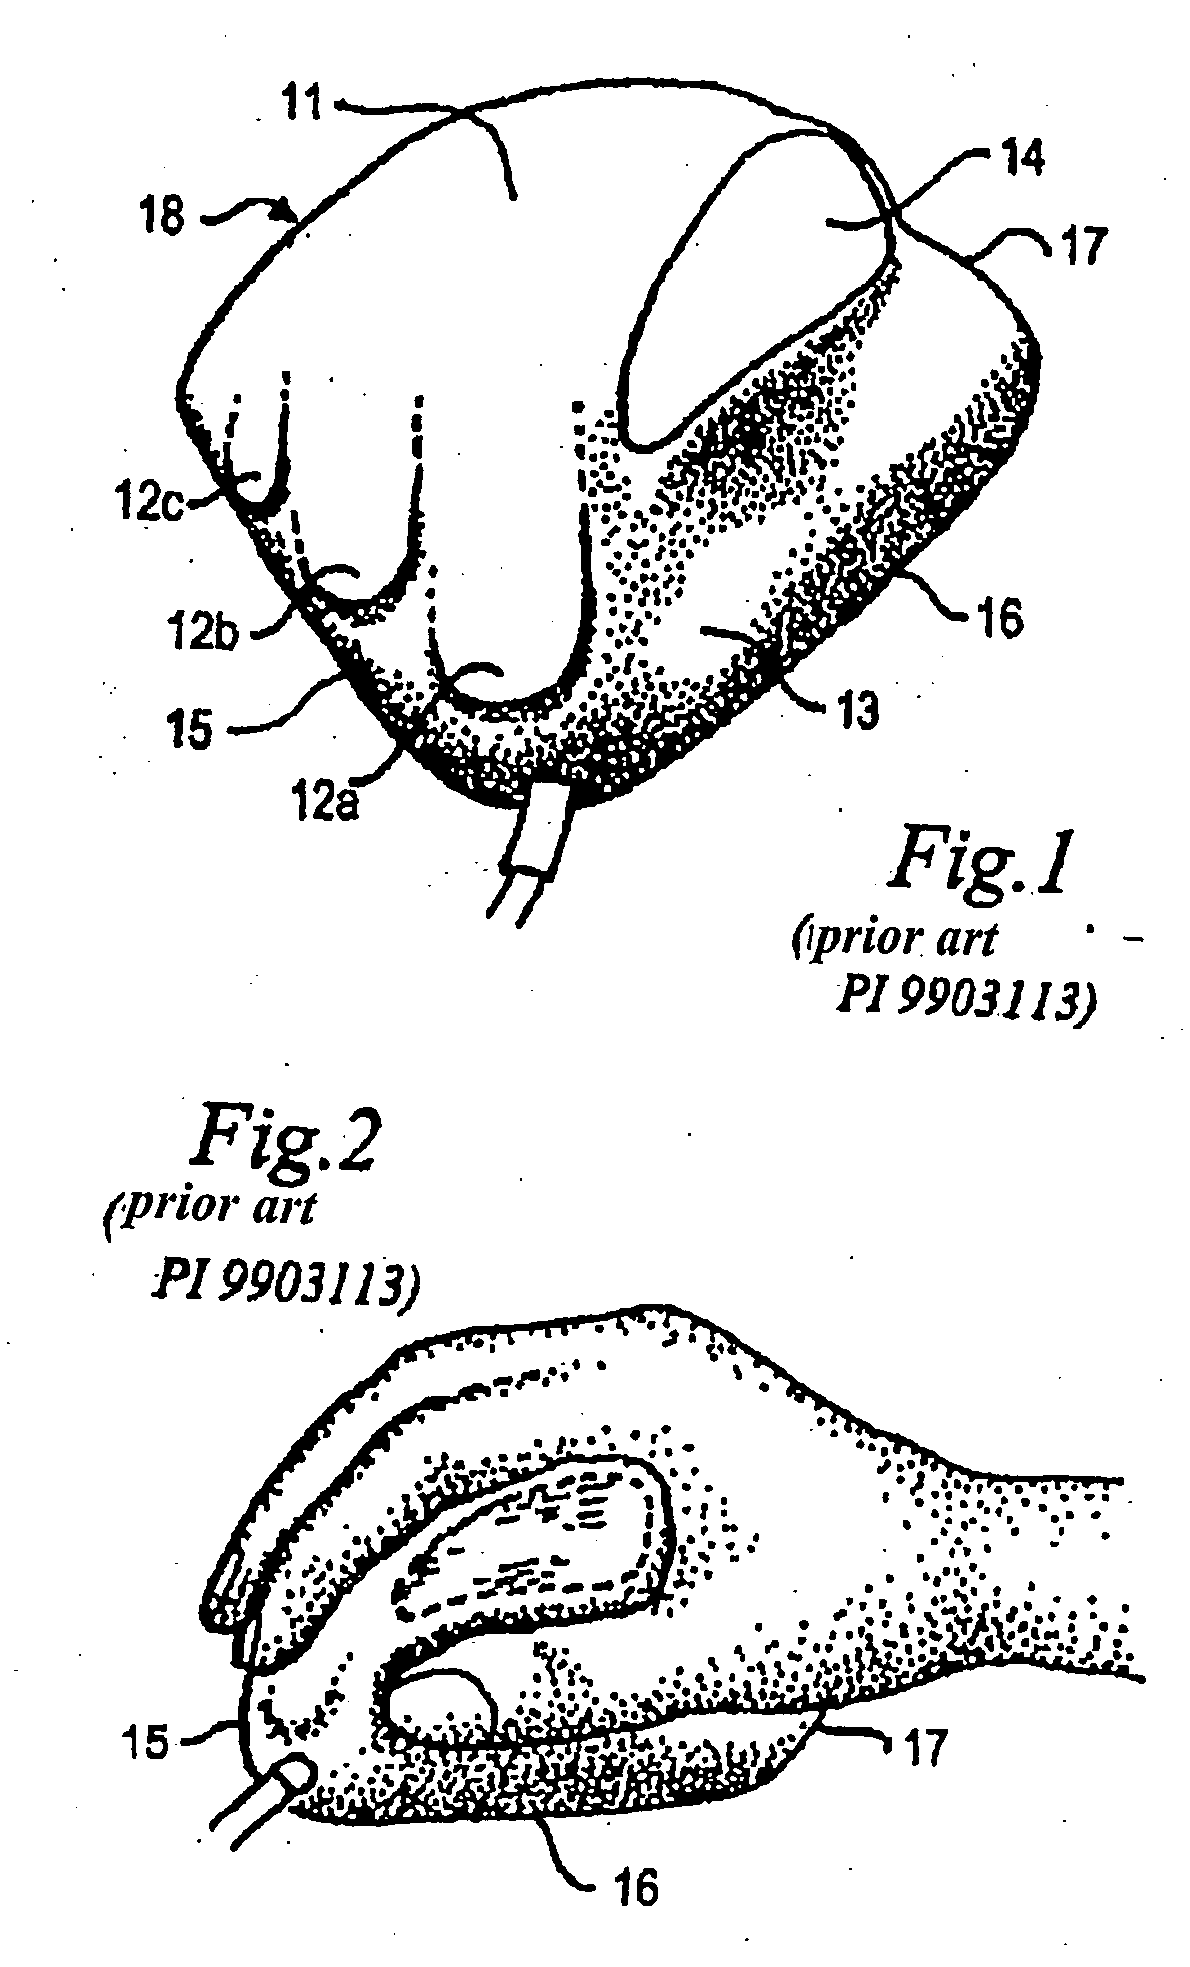 Constructive Disposition Applied To The Orthopedic Computer Mouse